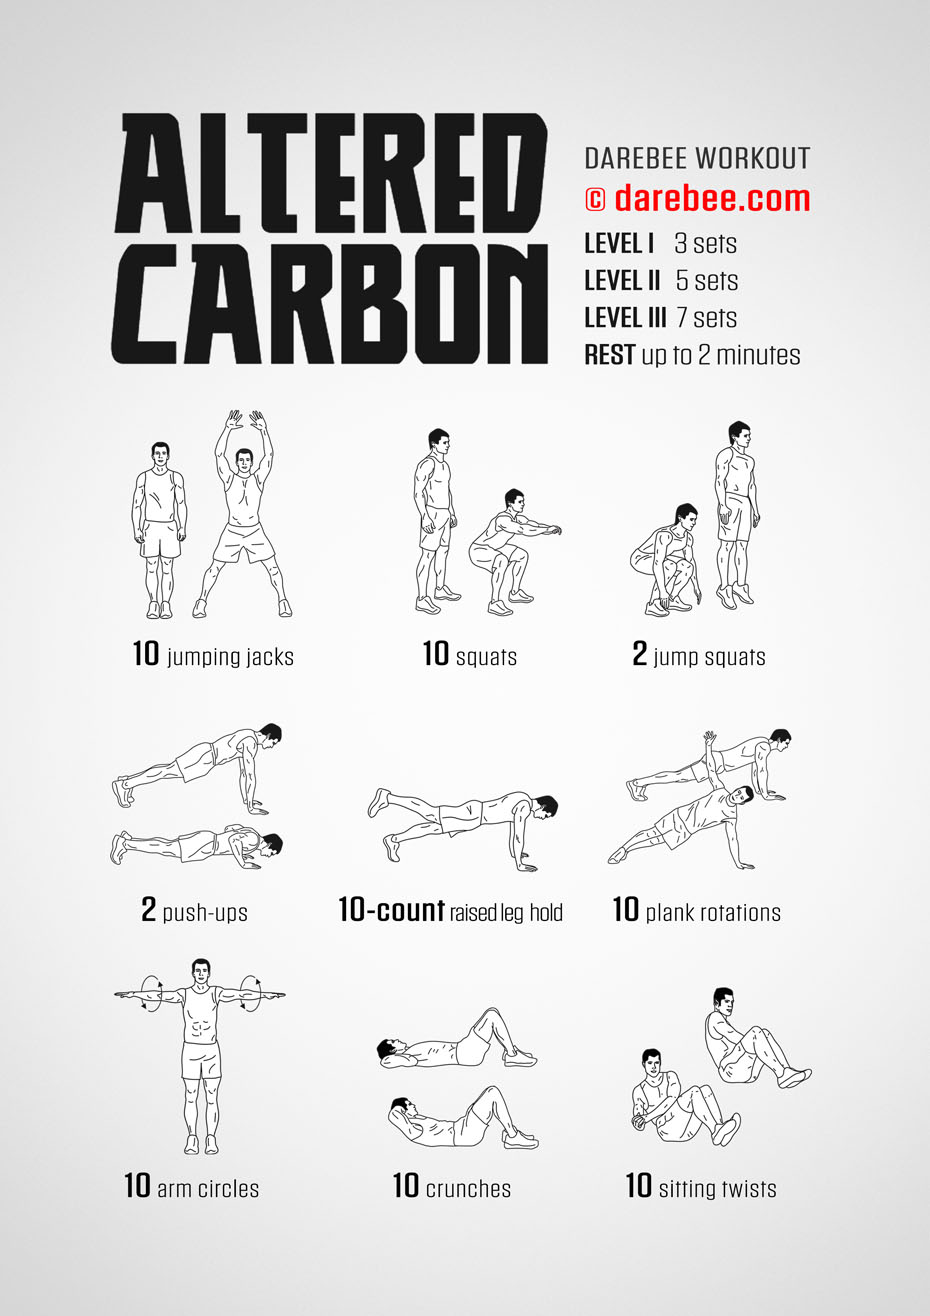 Altered Carbon is a DAREBEE home fitness no-equipment full-body strength workout that helps you develop greater strength and mobility.